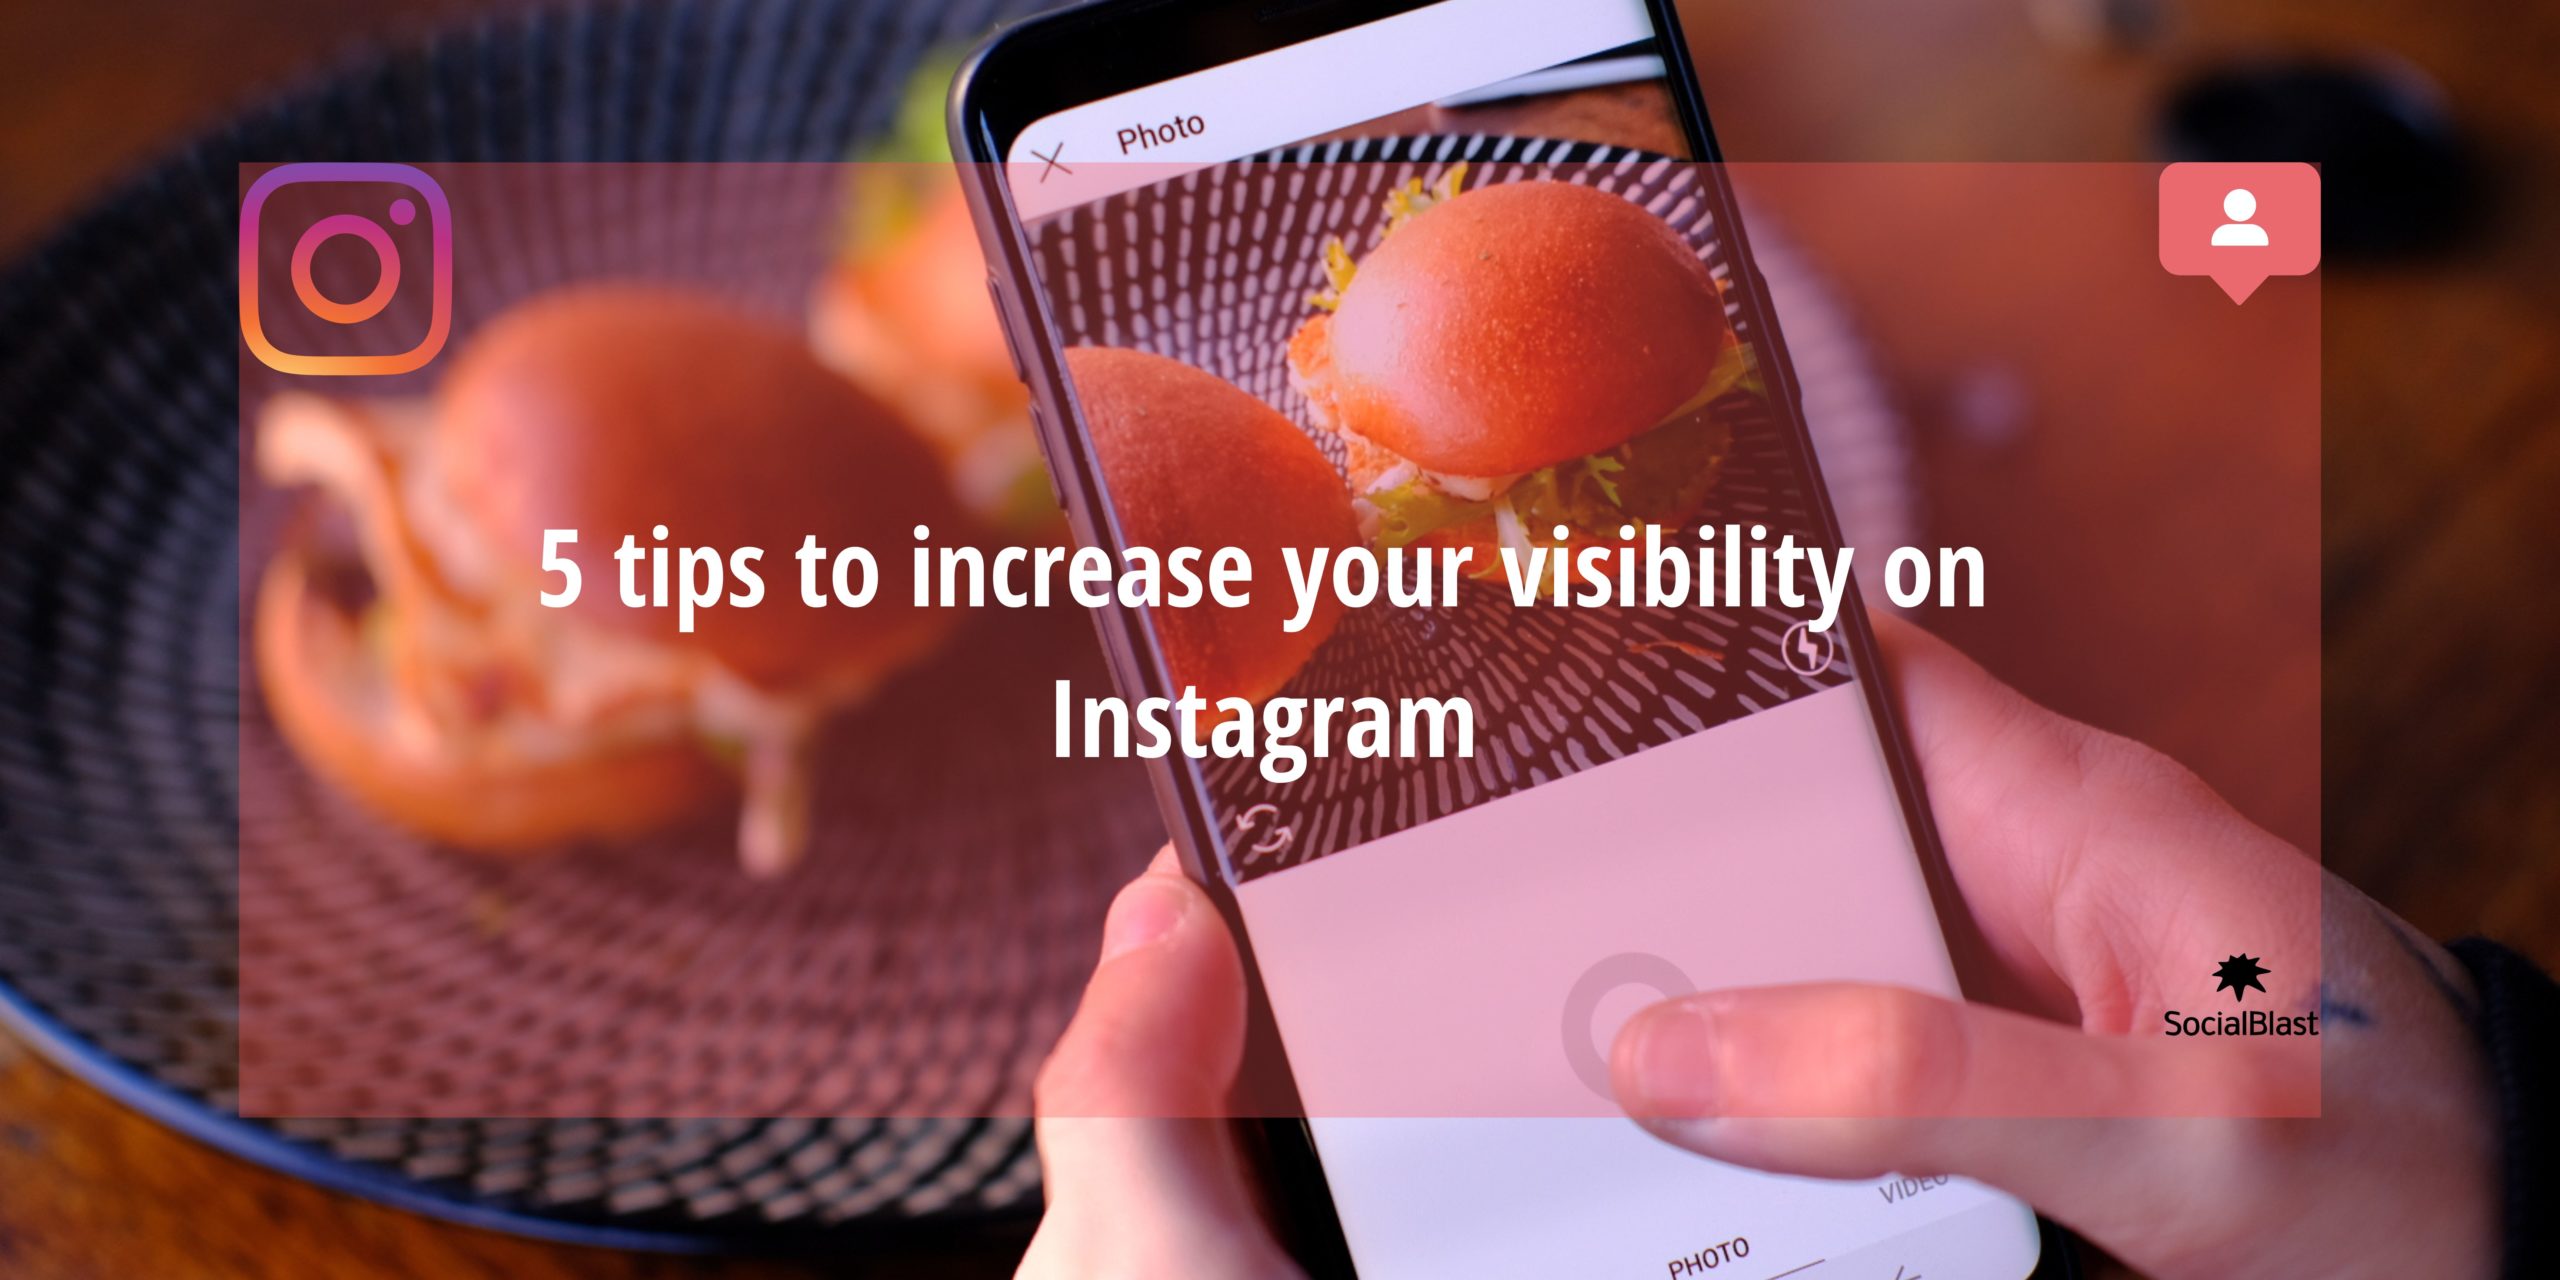 5 tips to increase your visibility on Instagram